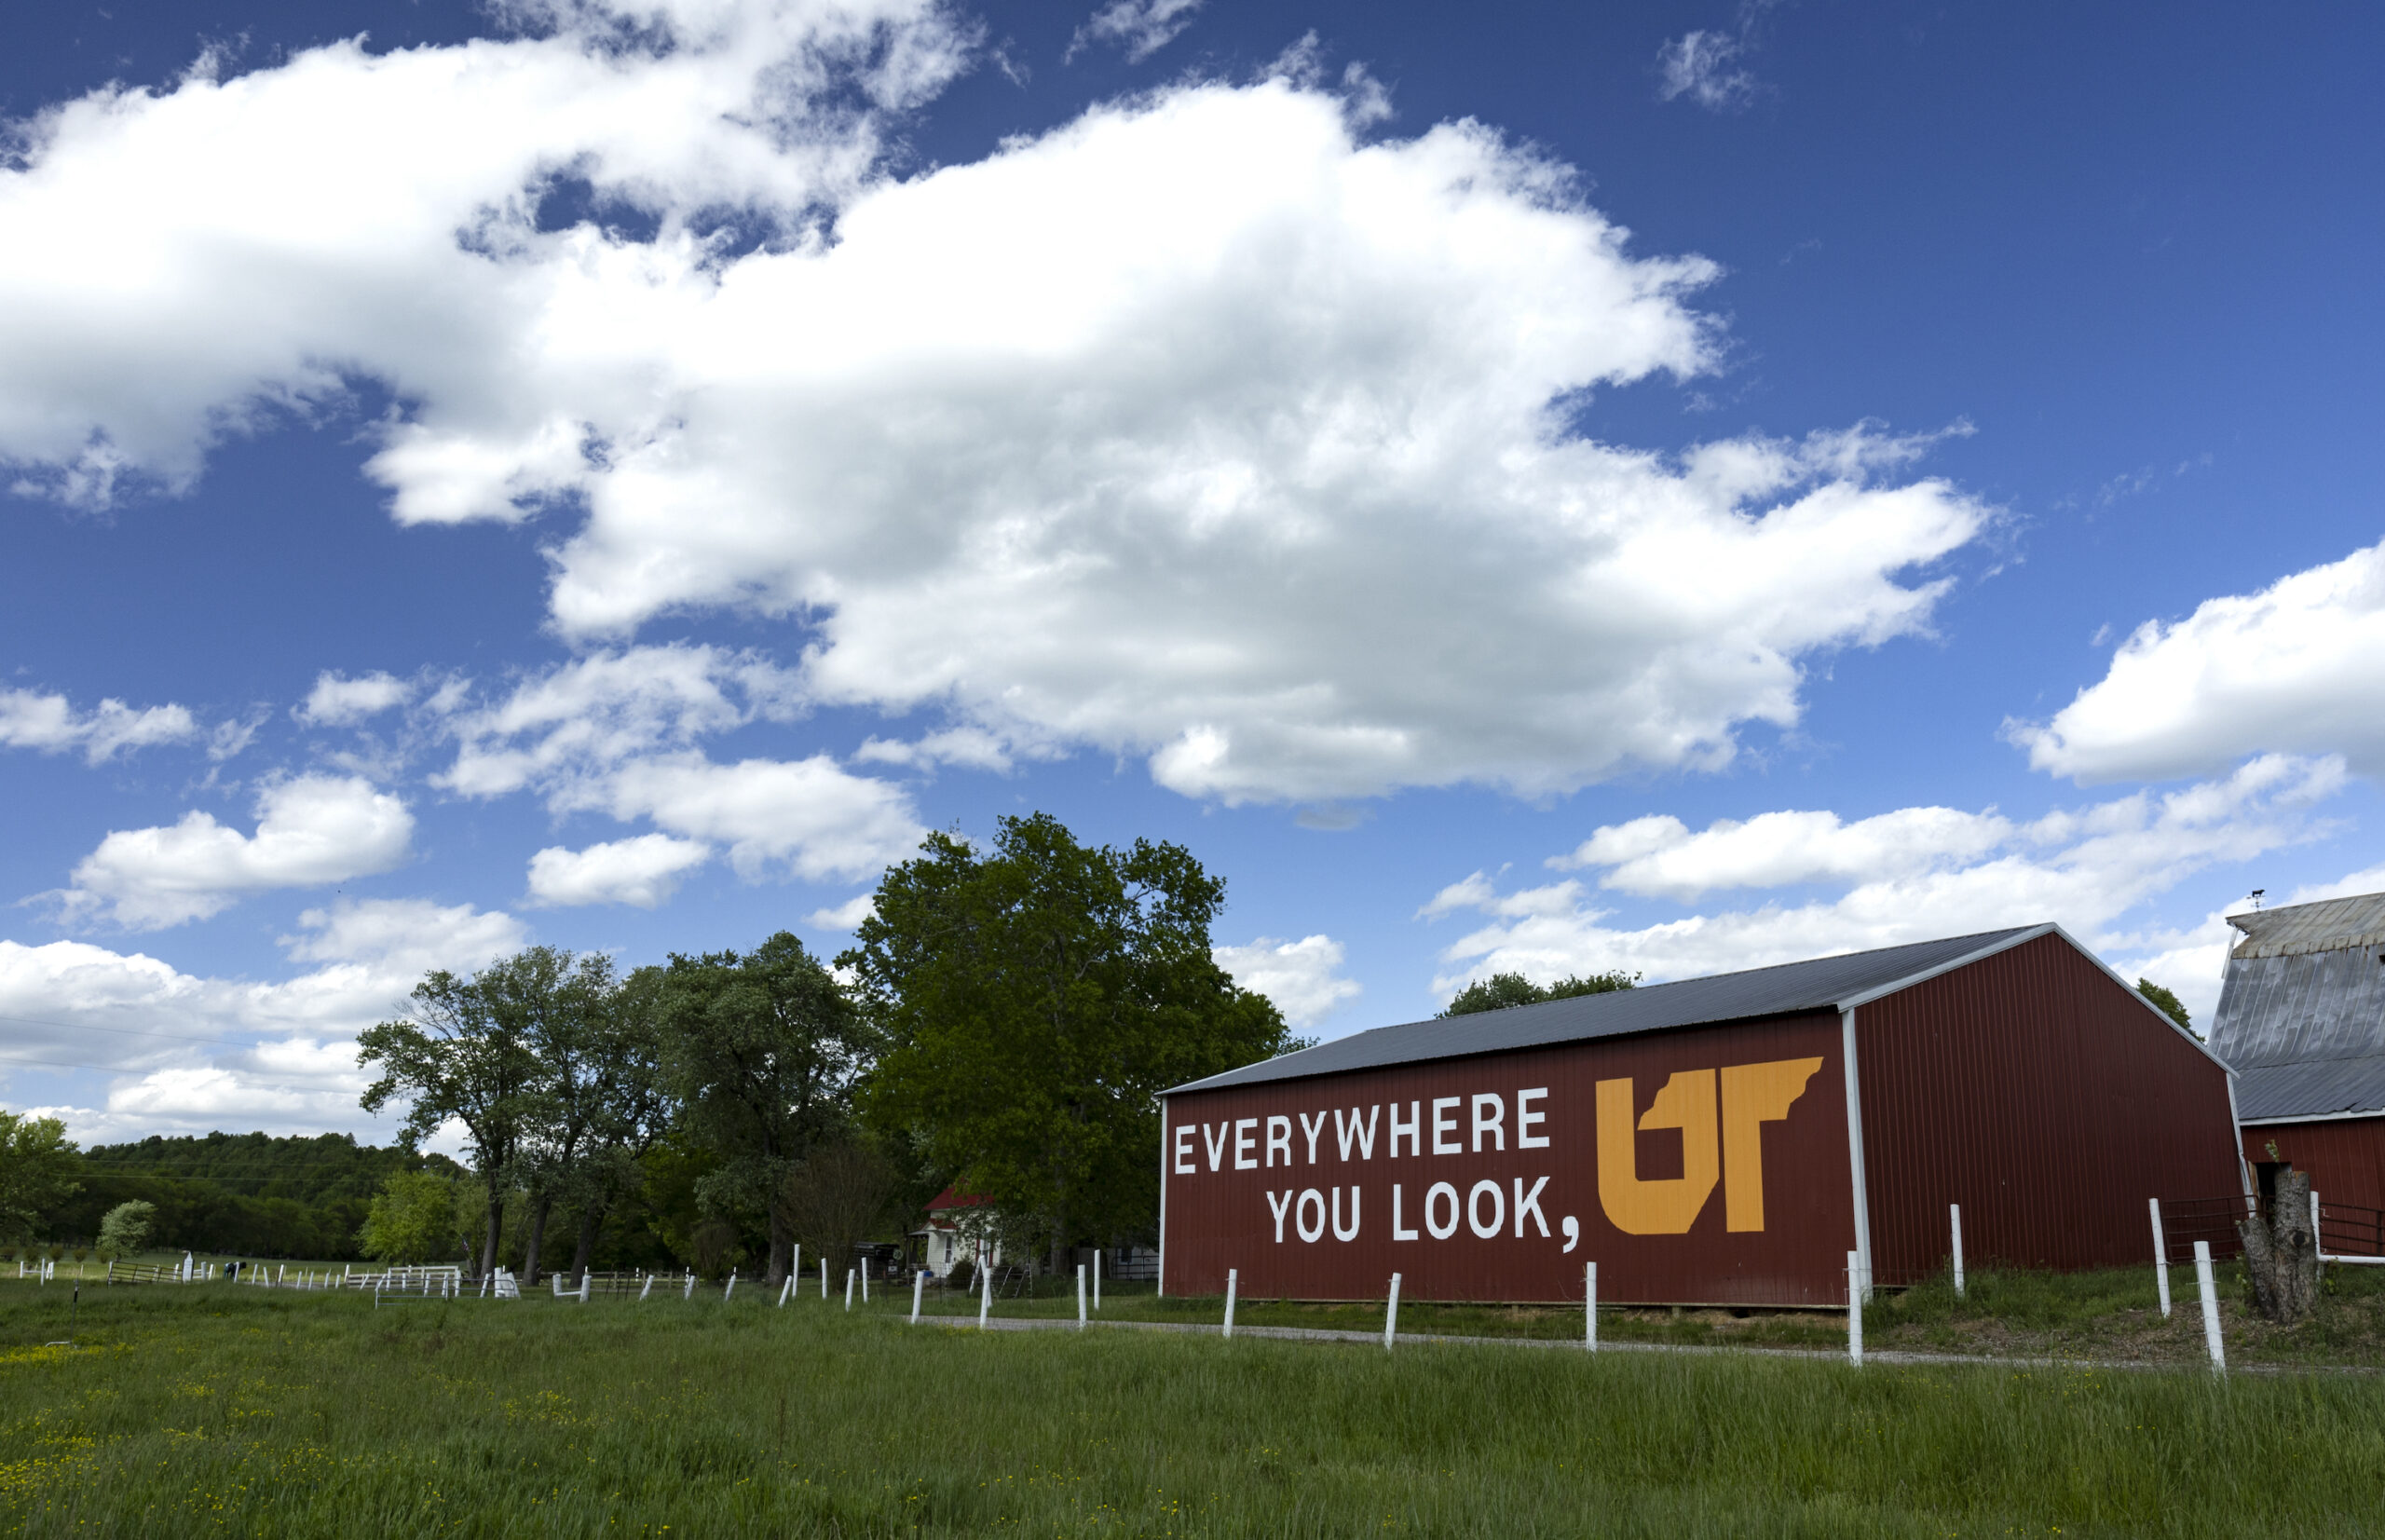 39th 'Everywhere You Look, UT' Mural on Barn at Friendship Acres Farm in  Giles County - UT System News